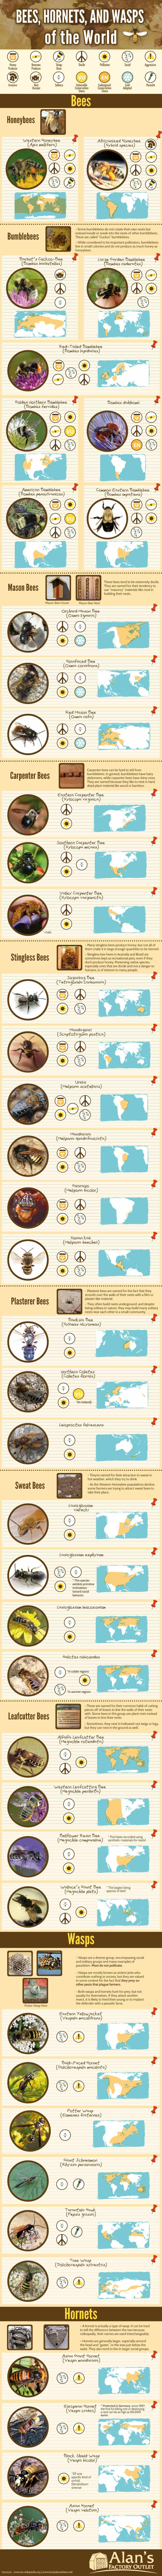 Bees, Hornets and Wasps of the World